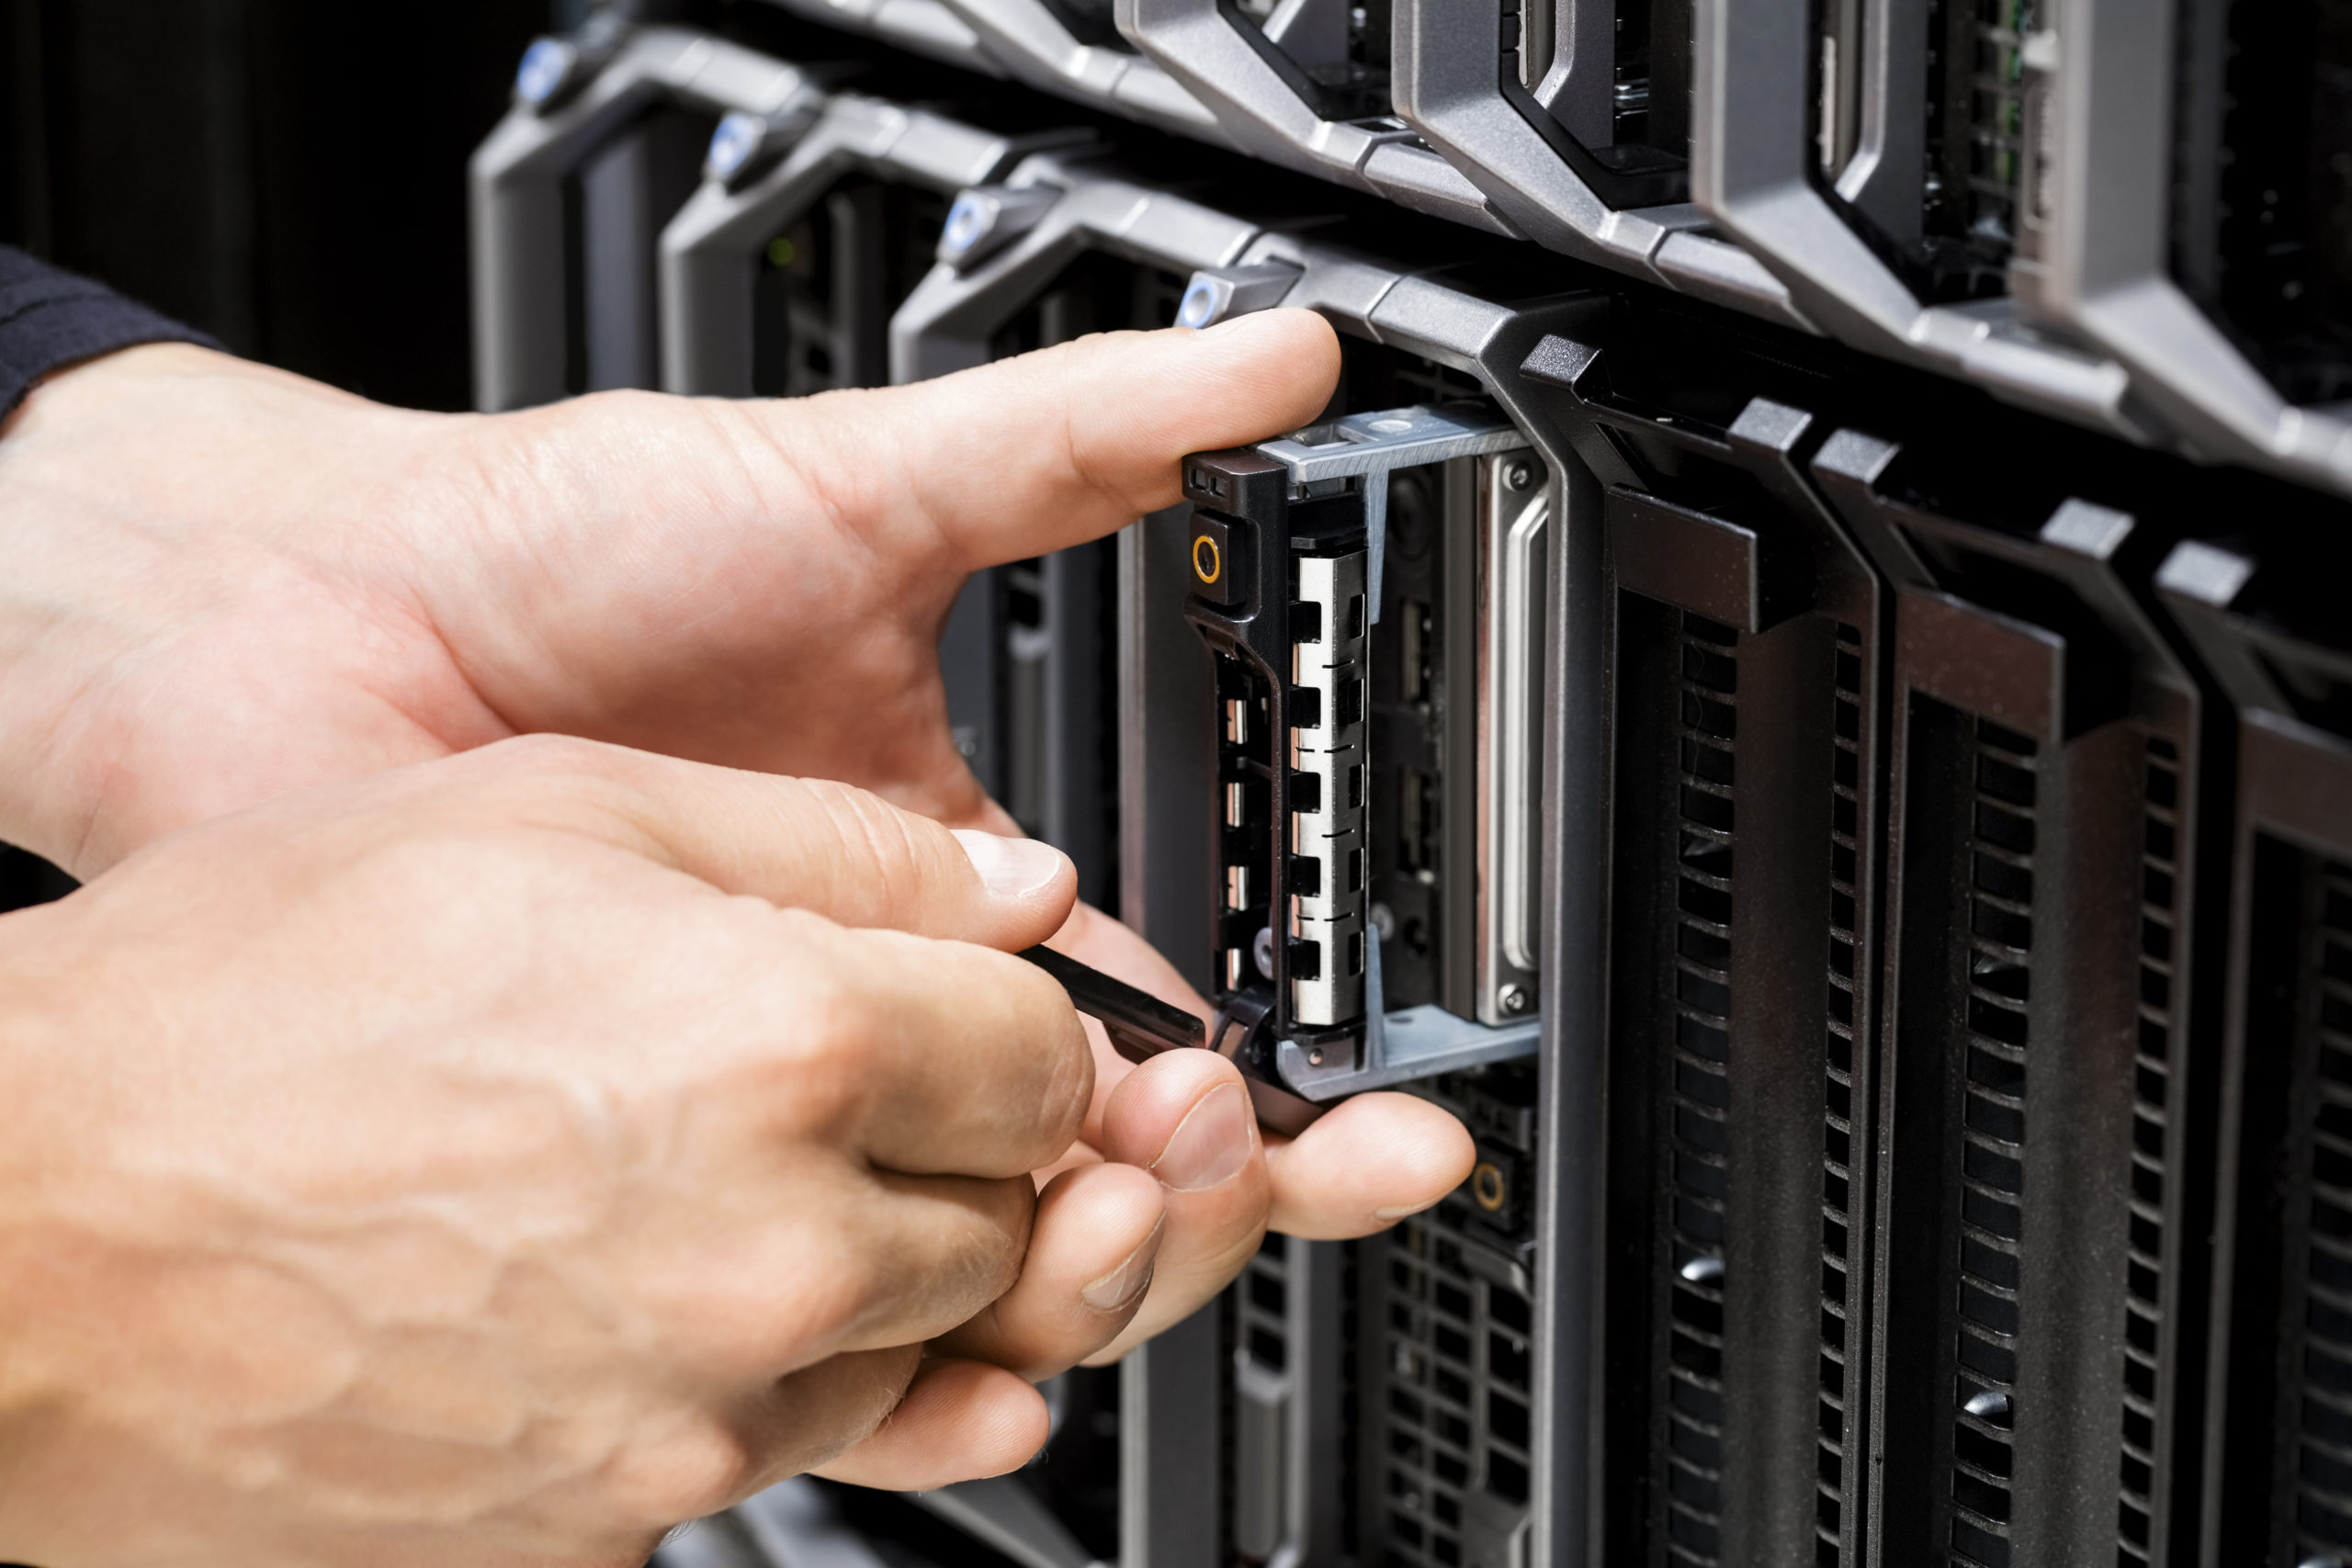 IT Technicians Hands Working On Server At Data Center